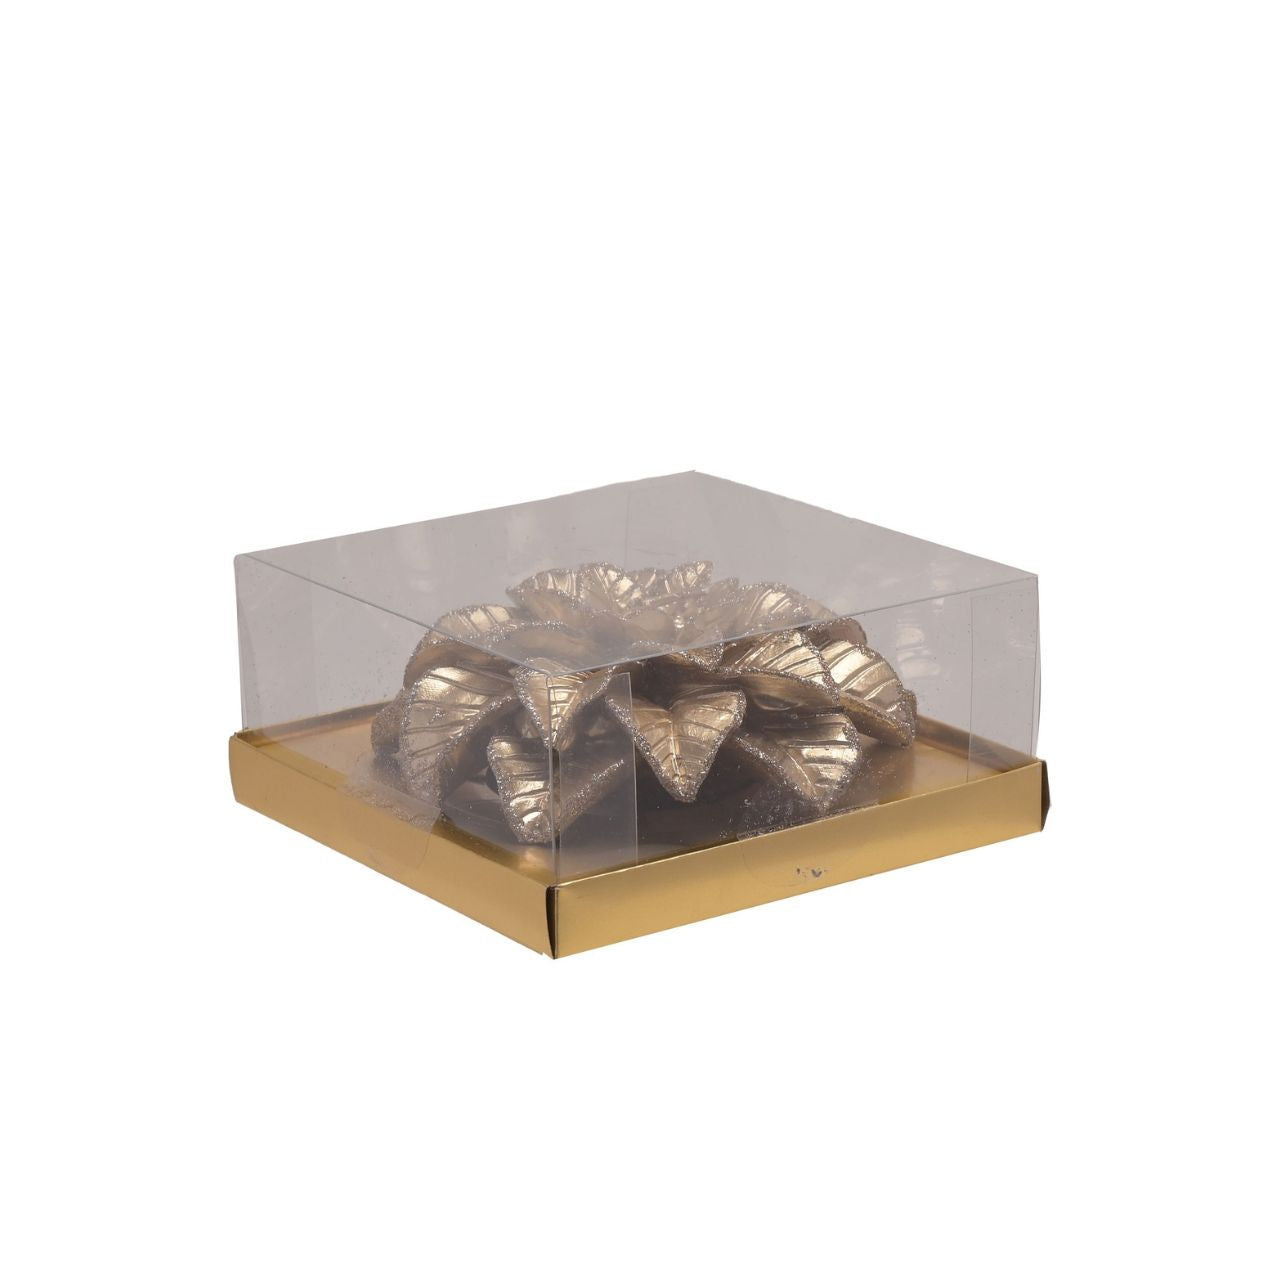 Large Gold Christmas Poinsettia Candle  A large gold poinsettia candle by THE SEASONAL GIFT CO.  This standout candle will help to create a magical Winter Wonderland at home when lit during the festive period.